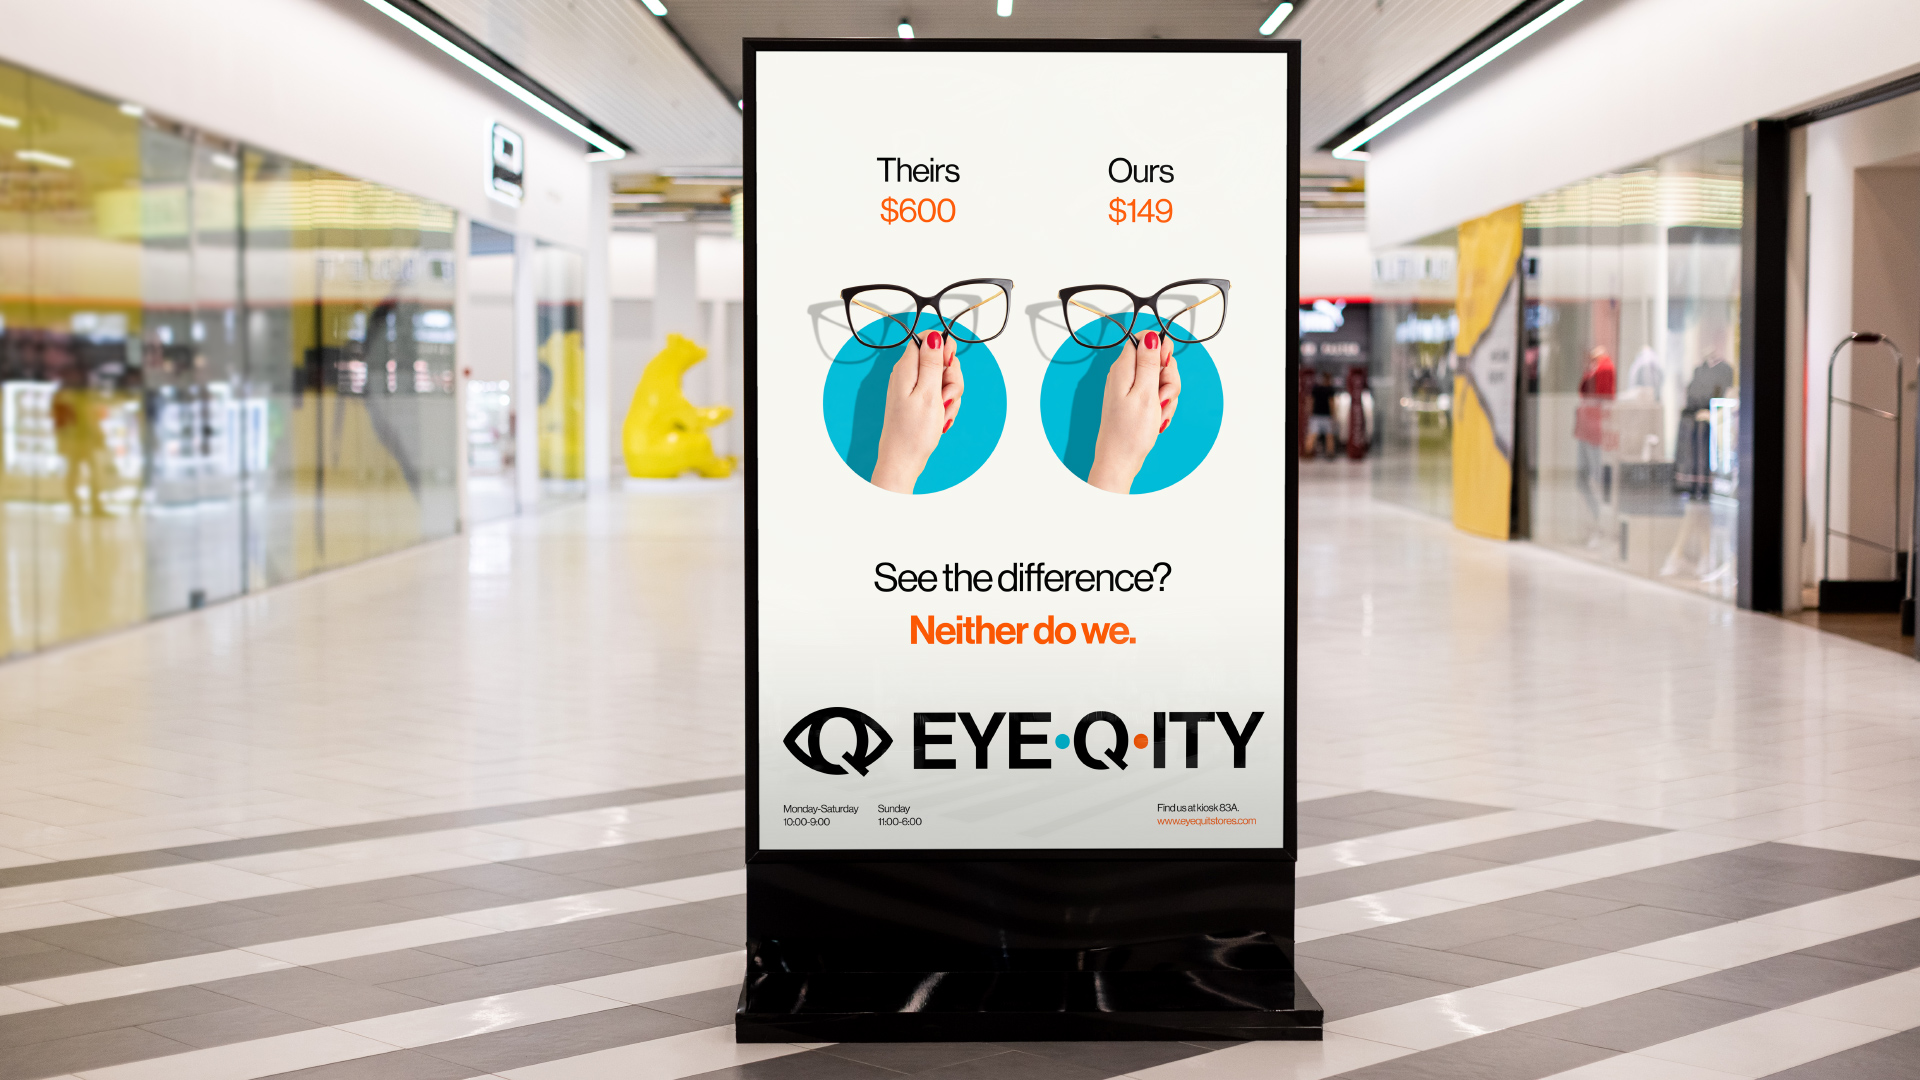 An ad on mall signage sits in between rows of stores. The ad shows hands holding up the same pair of glasses. The one on the left has a $600 price tag. The one on the right has a $149 price tag. The text below says, “See the difference? Neither do we.” The logo is below it.